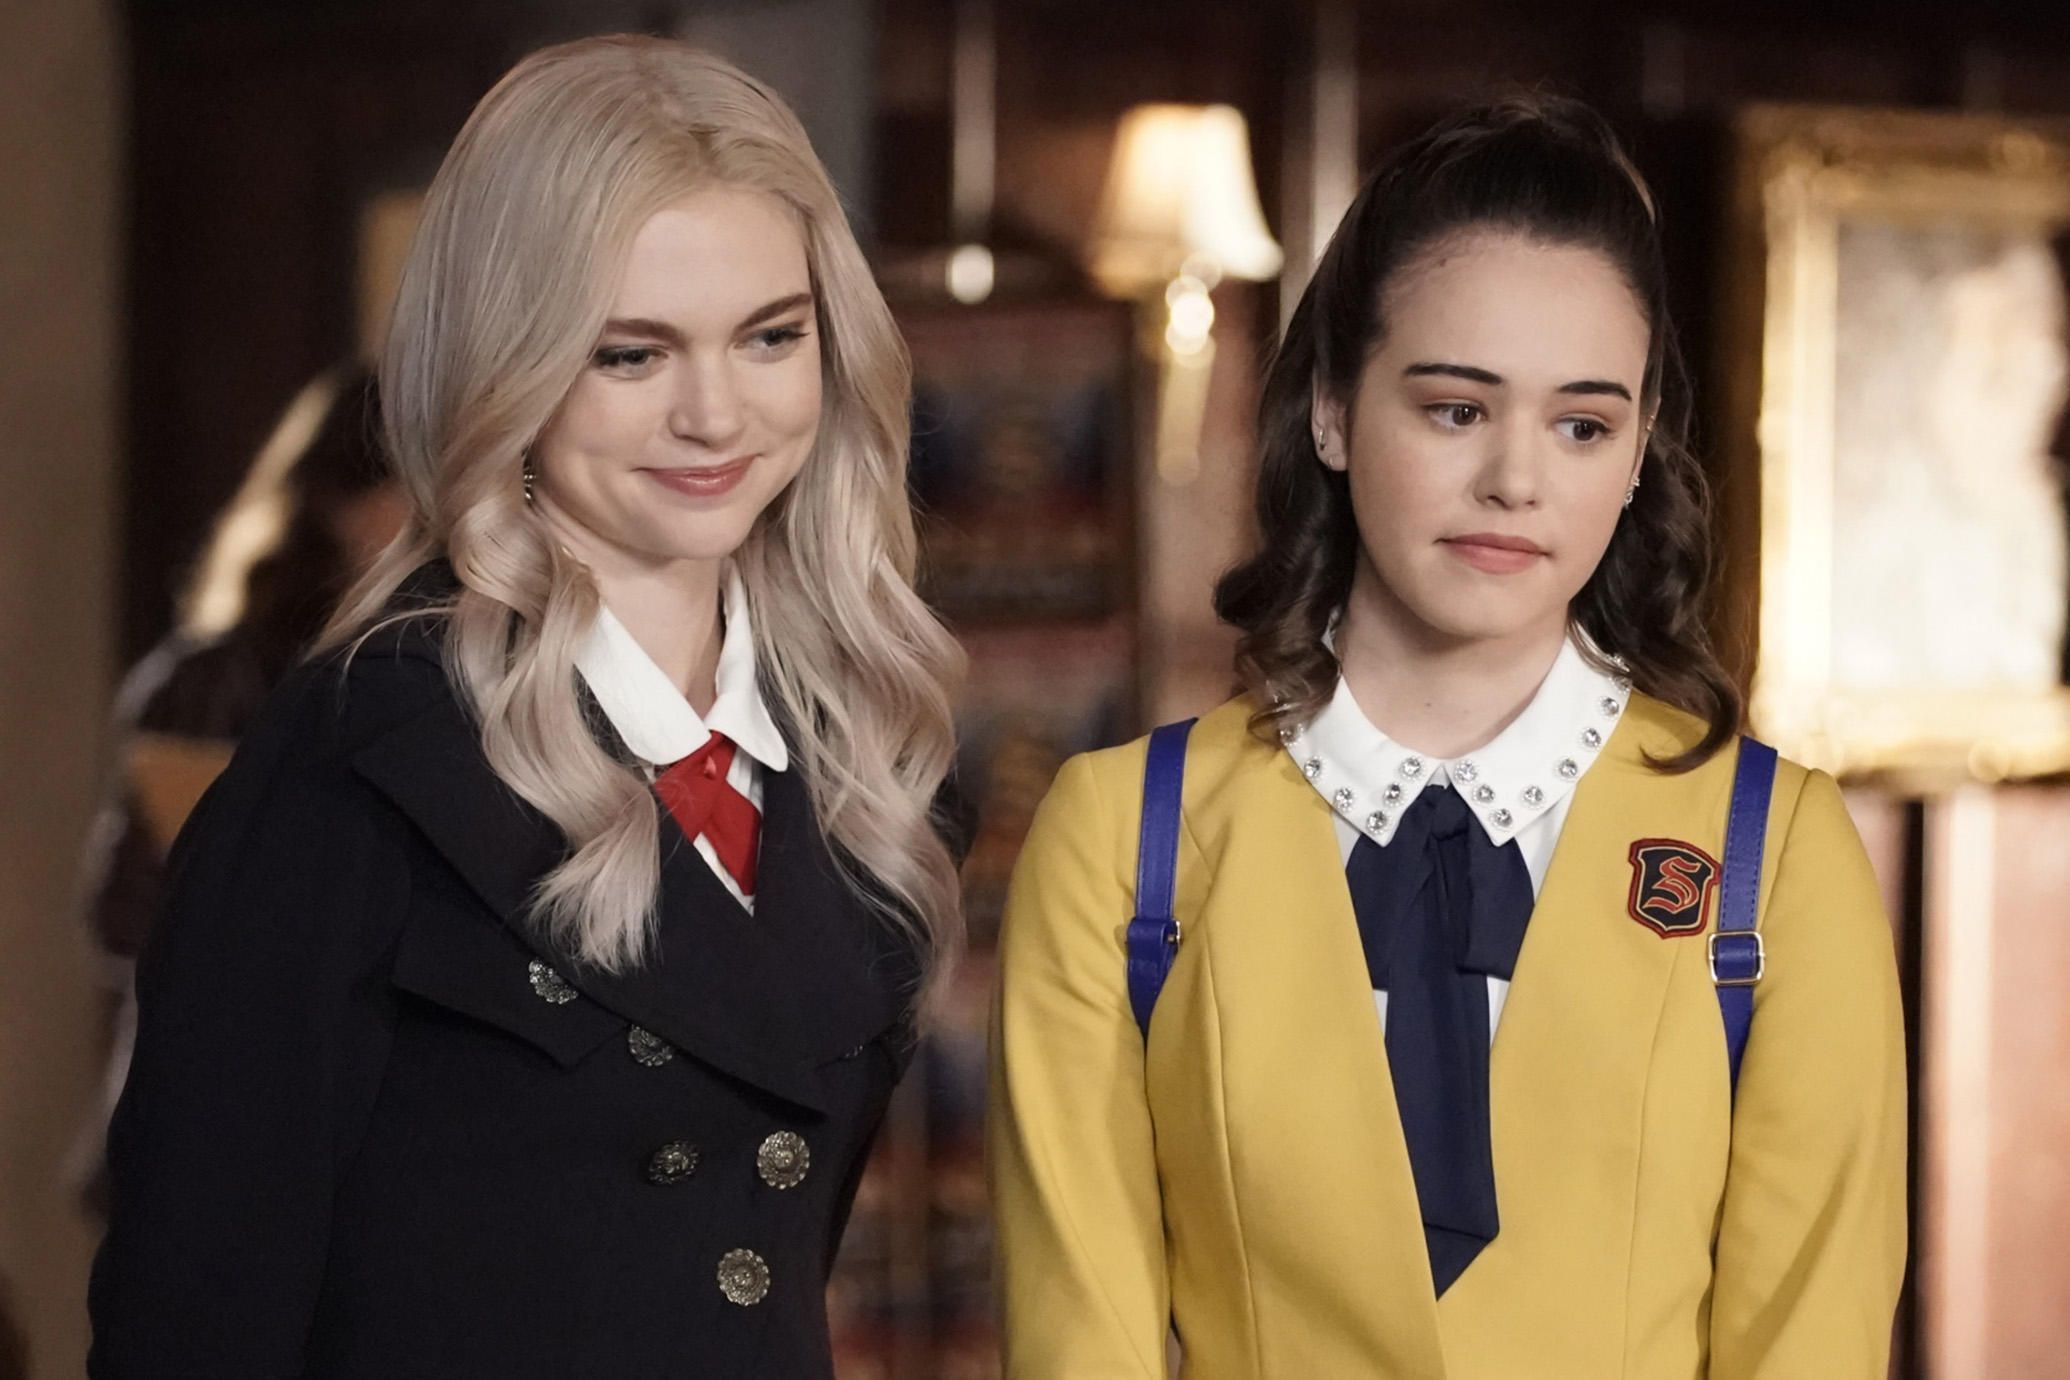 Everything You Need to Know About 'Legacies' Season 2